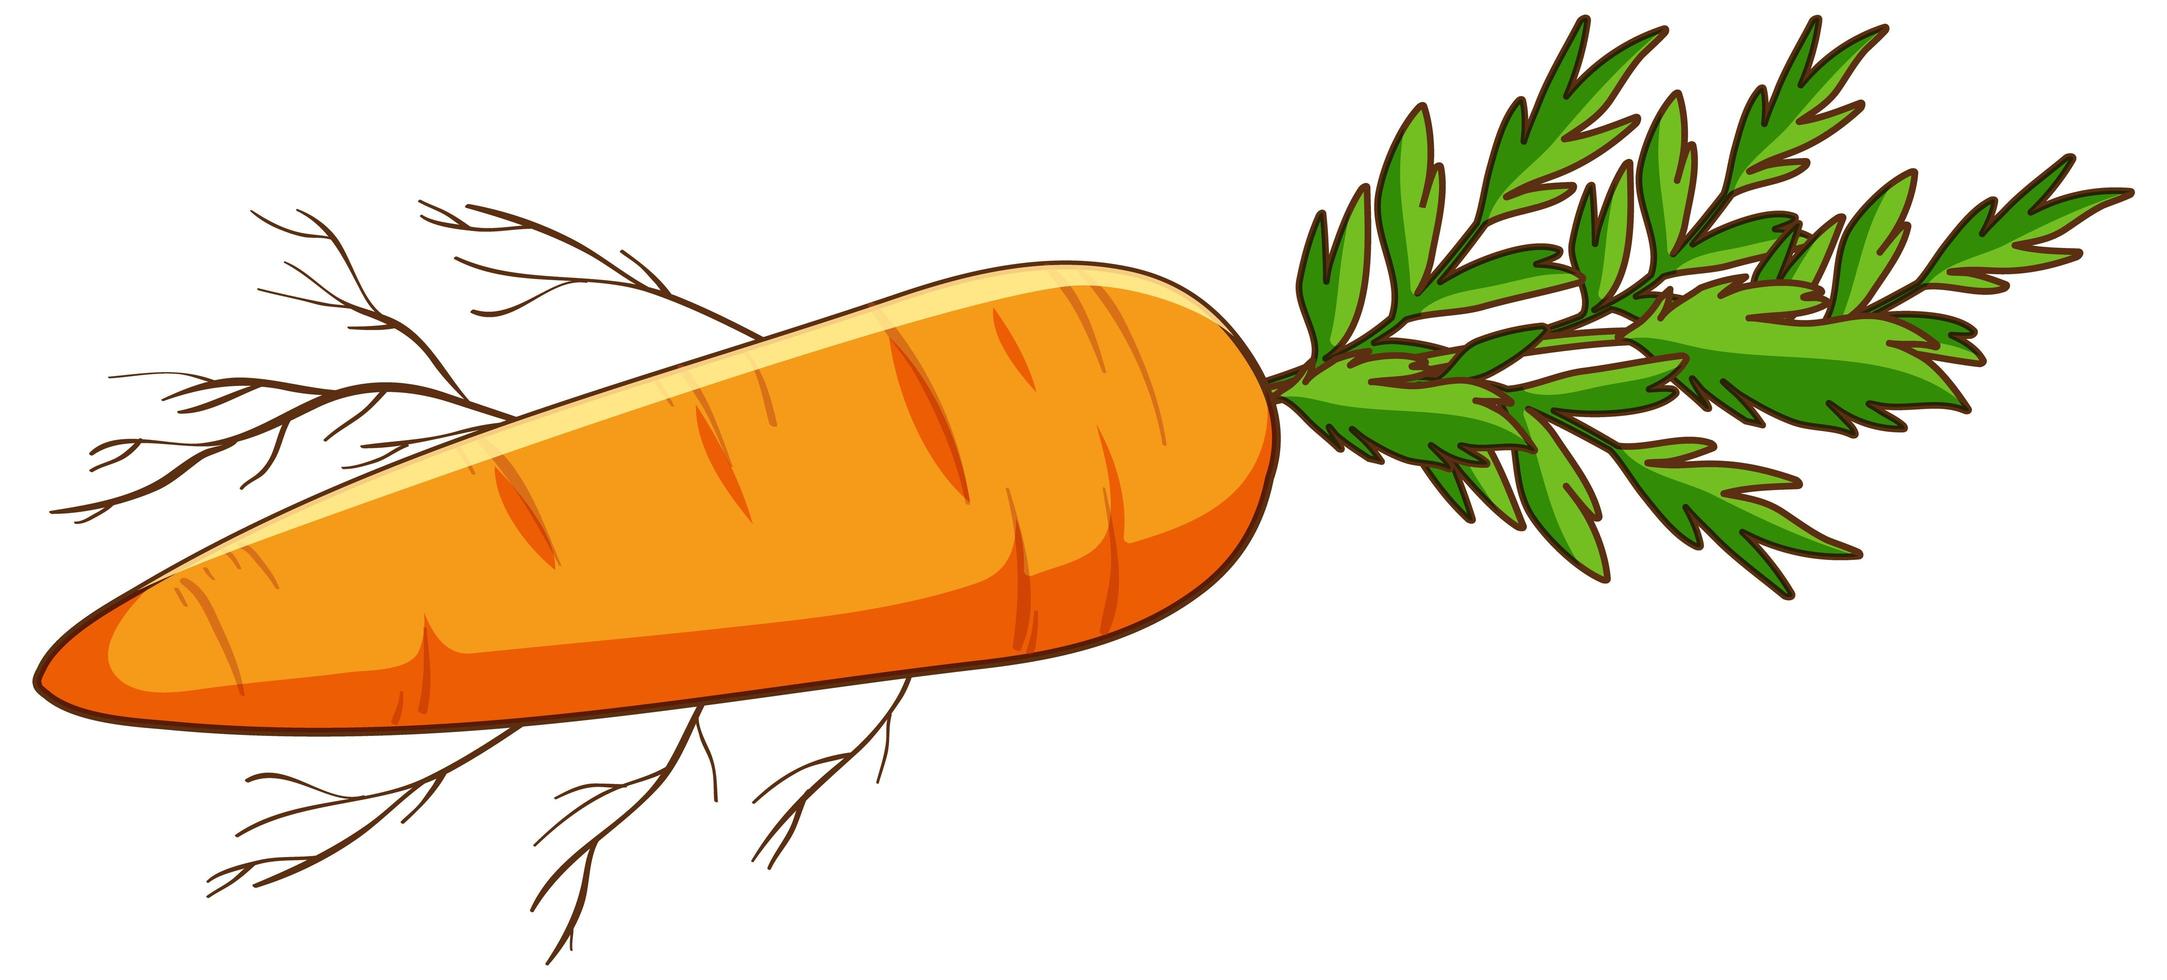 Simple carrot on white background vector